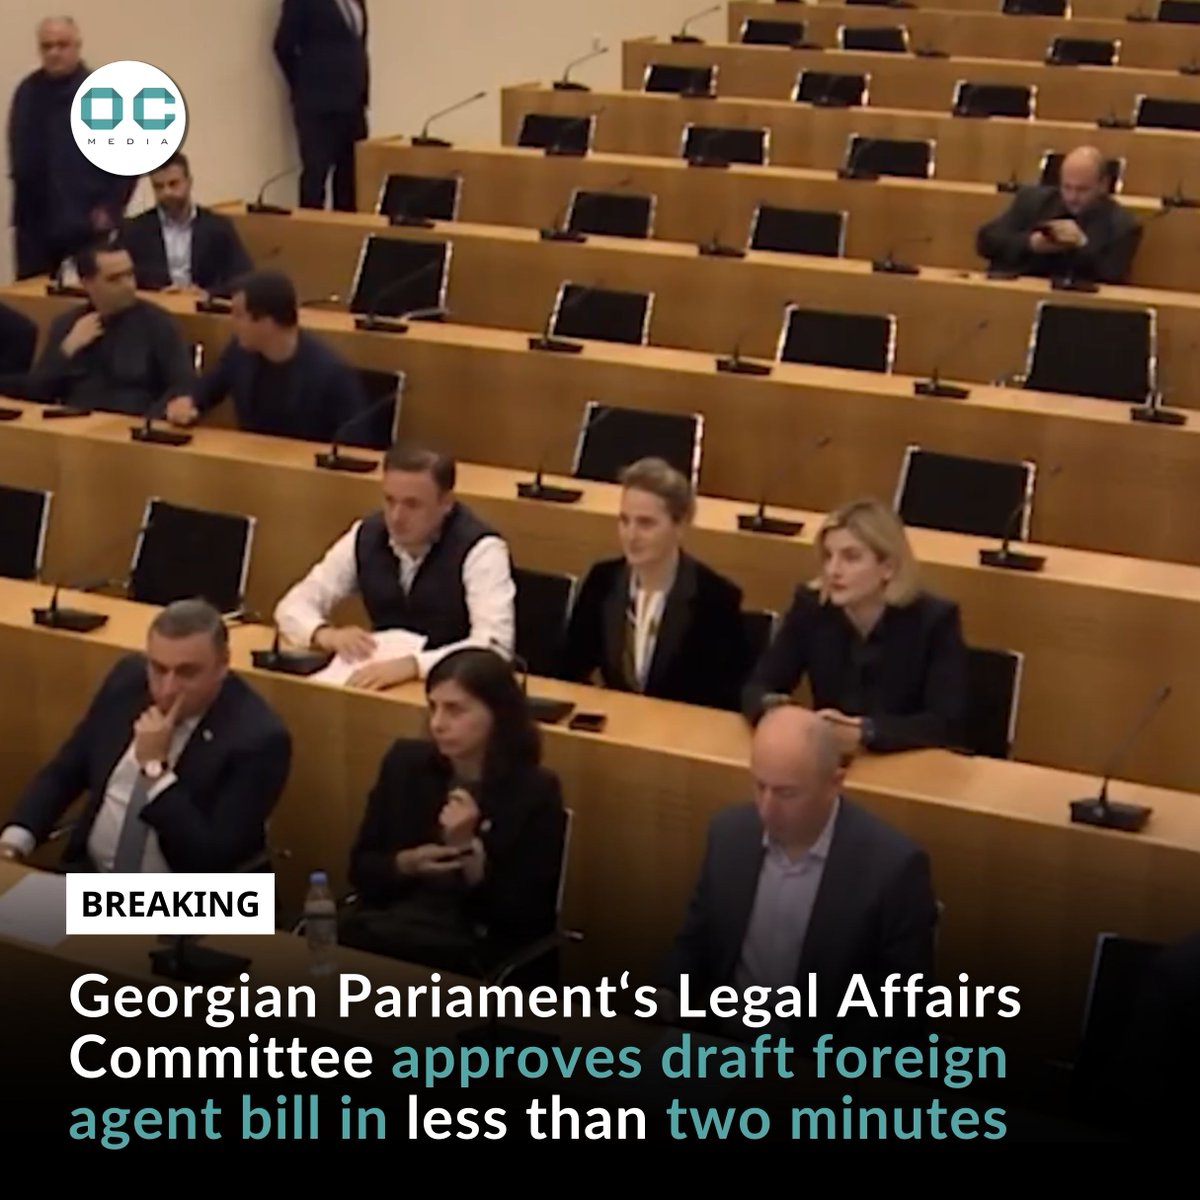 The Georgian Parliament's Legal Affairs Committee commenced its hearing of the draft foreign agent law and approved it in less than two minutes as police violently assaulted and detained protesters gathered outside of parliament.